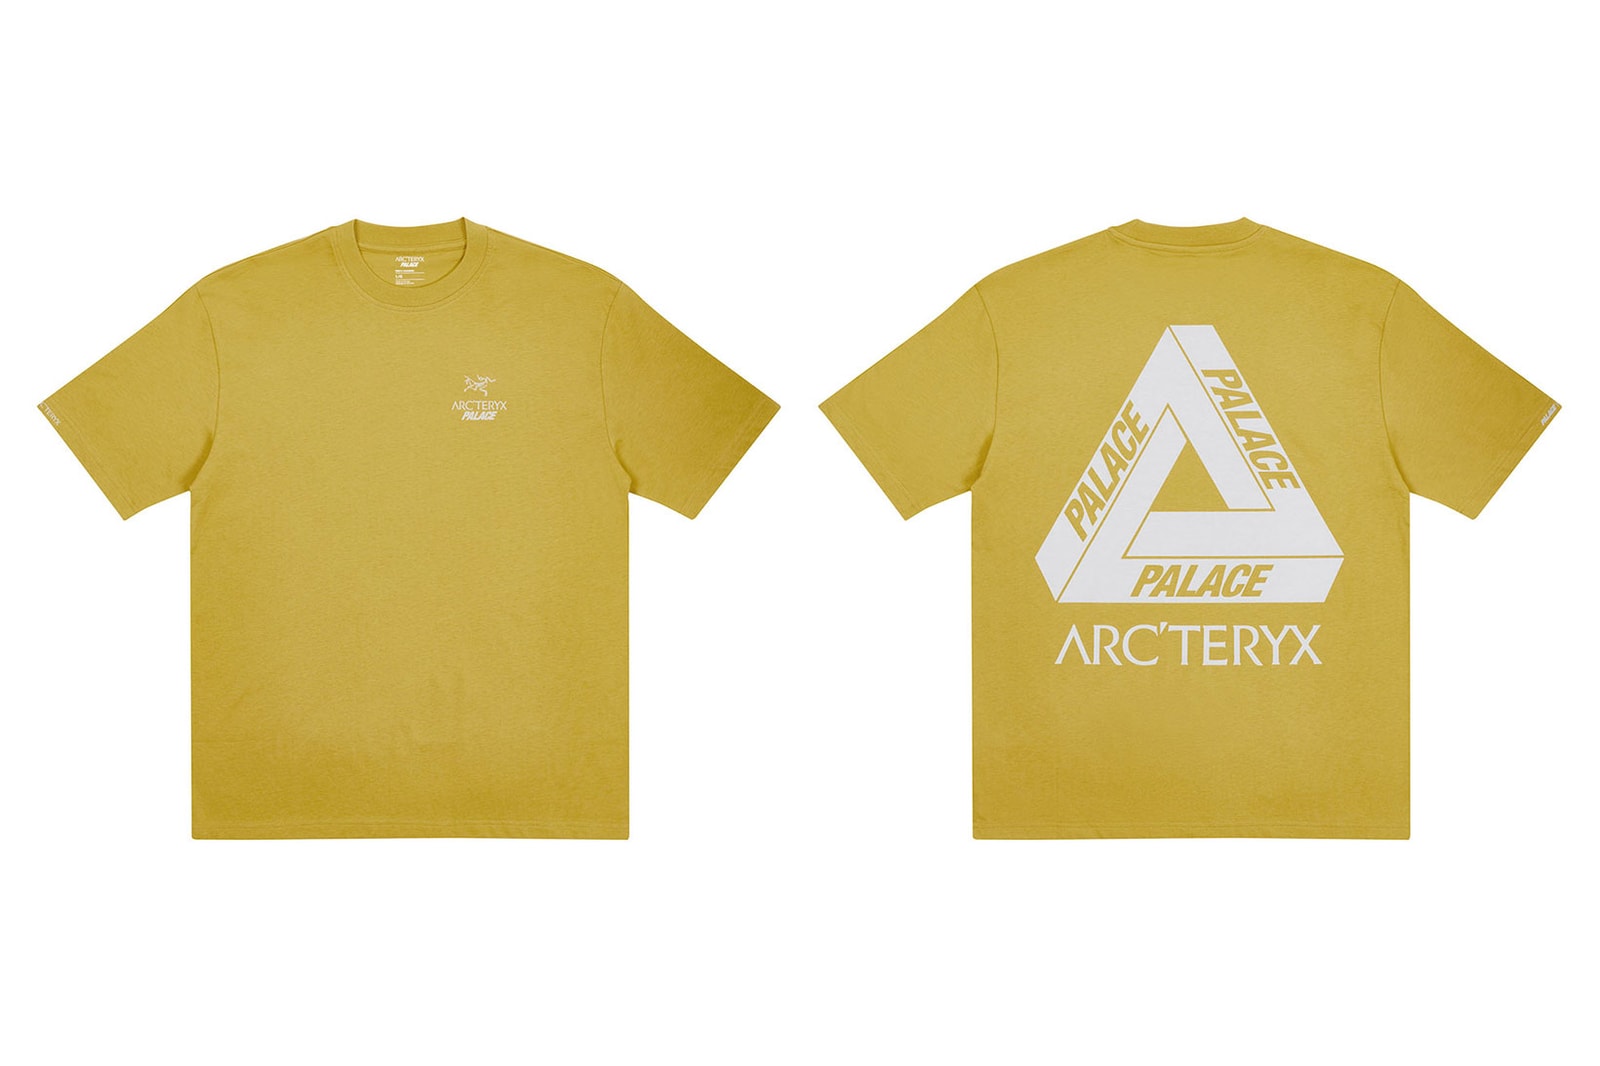 arcteryx palace skateboards collaboration outdoor jackets beanies hoodies gore-tex outerwear release